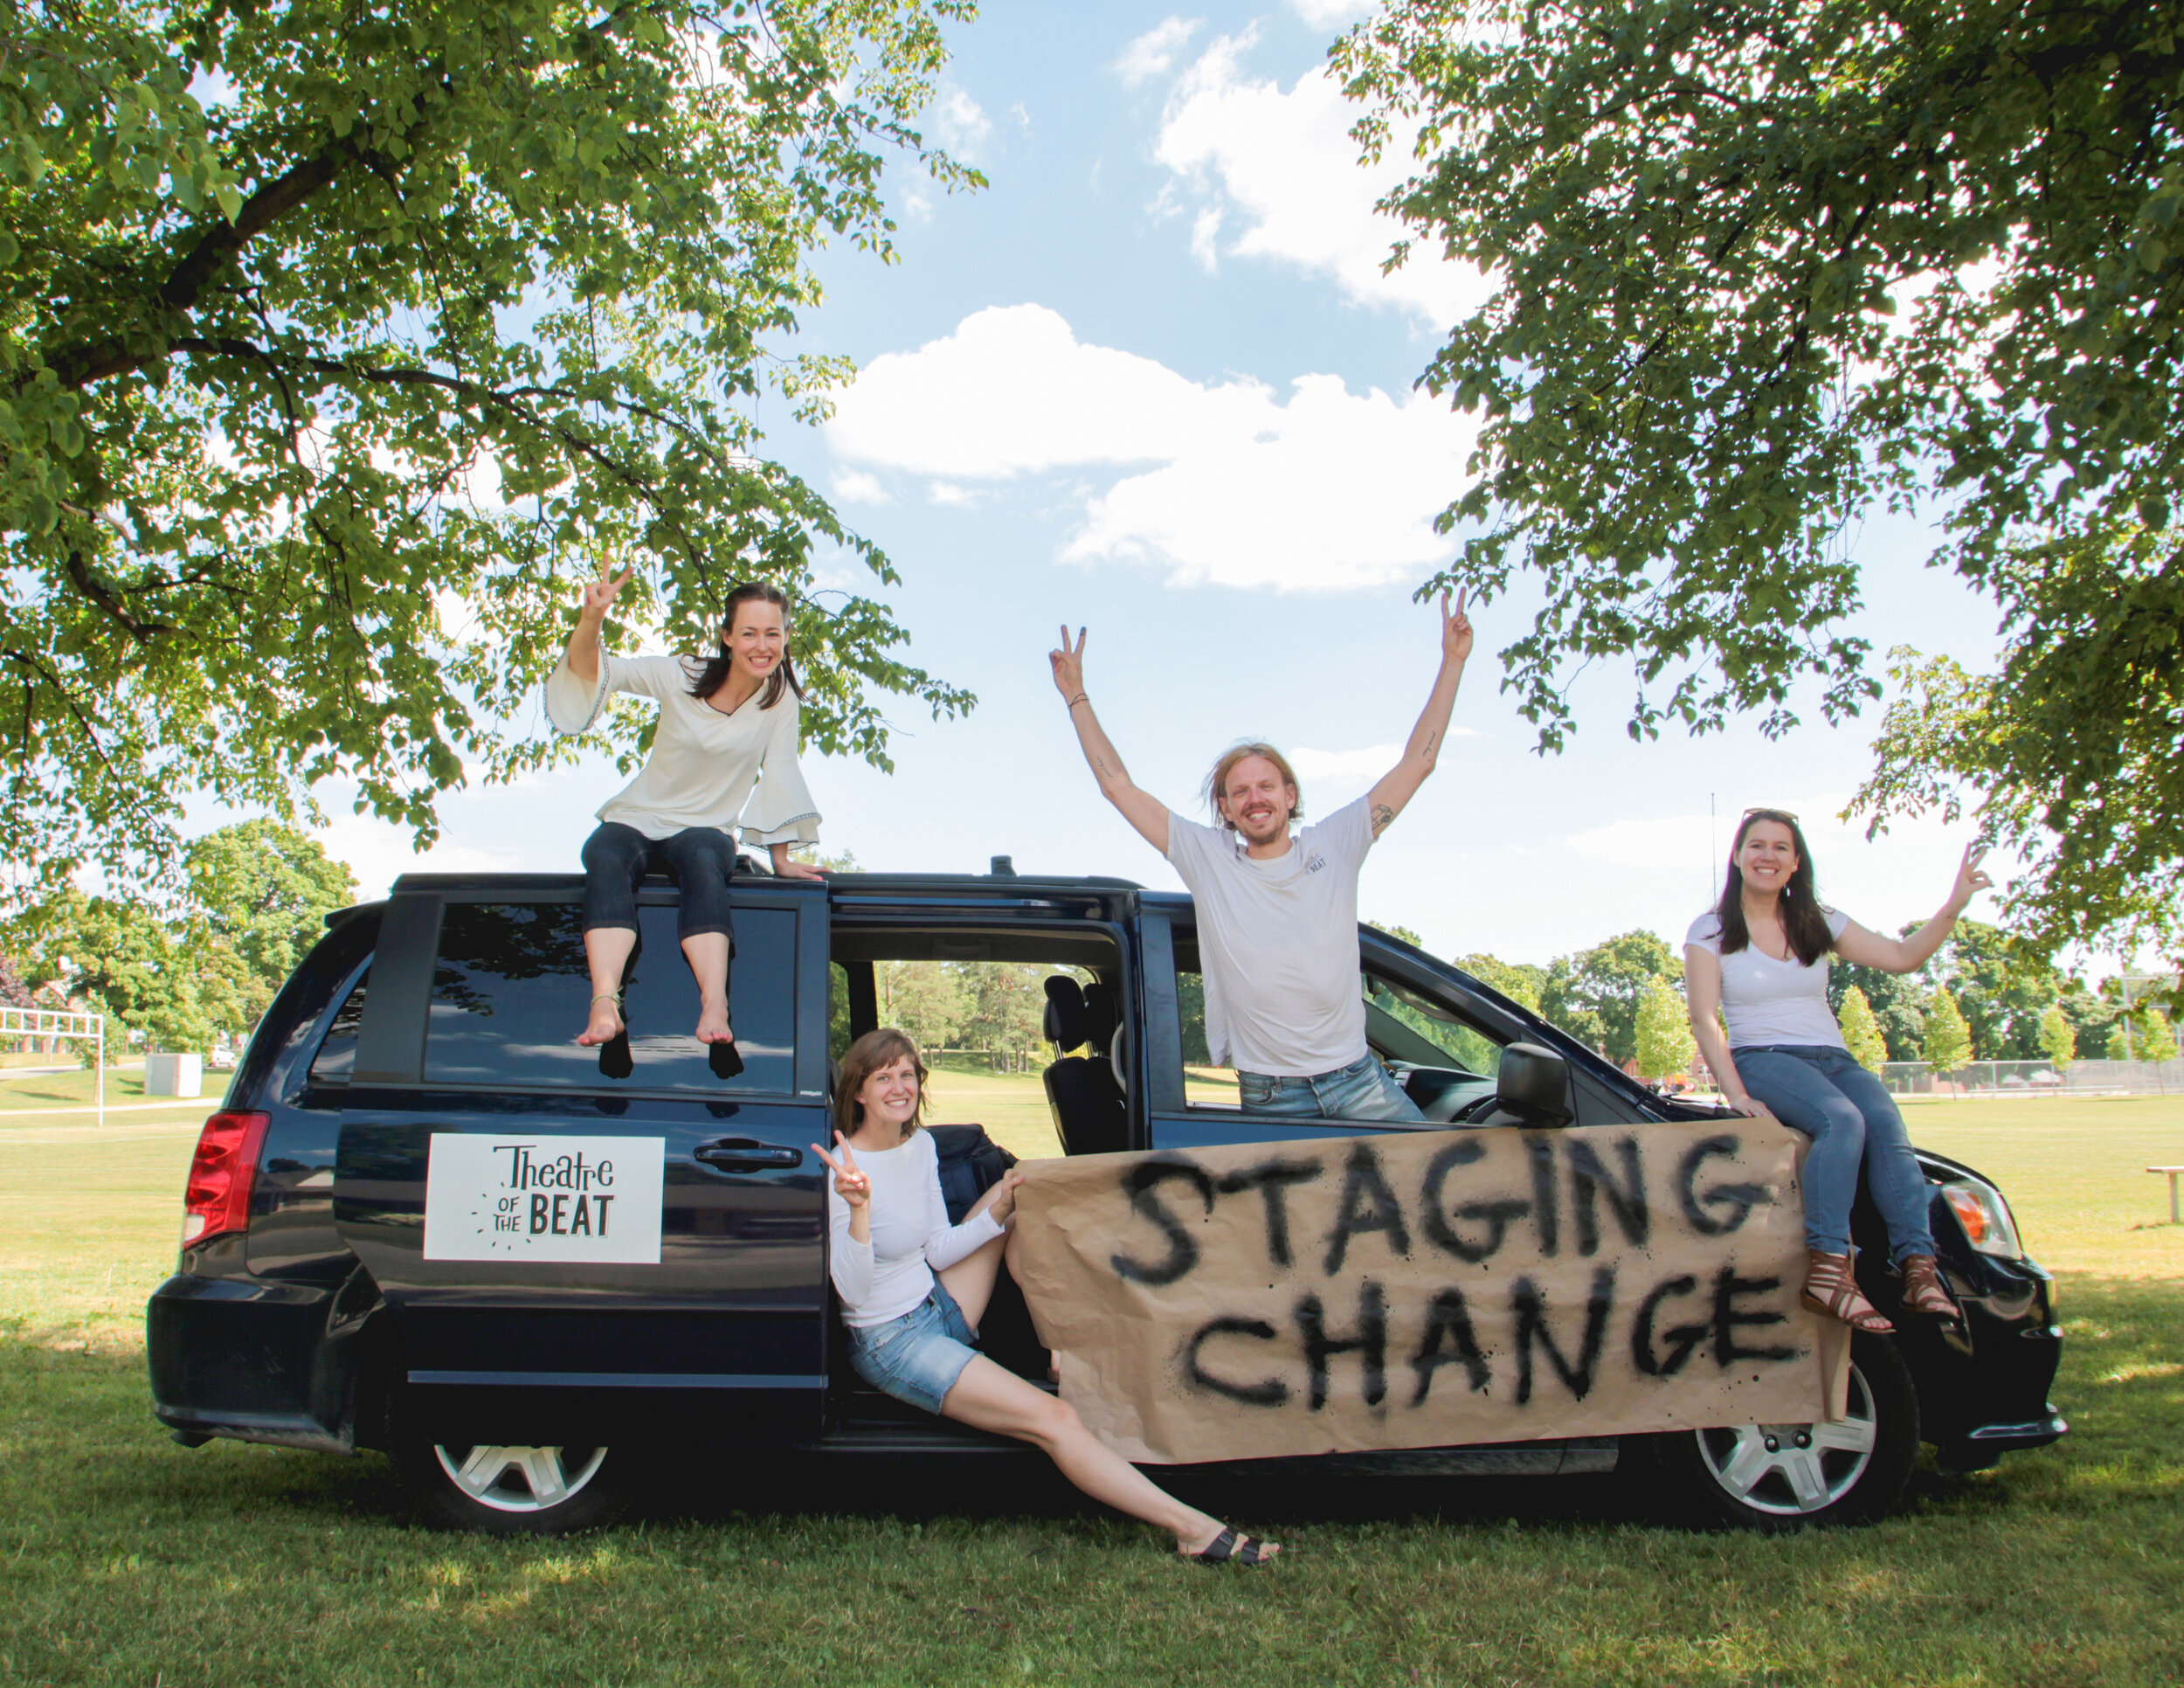  Kimberlee Walker, Rebecca Steiner, Johnny Wideman, and Laura McCallum in front of the Theatre of the Beat Tour Van holding a sign saying “STAGINING CHANGE” 